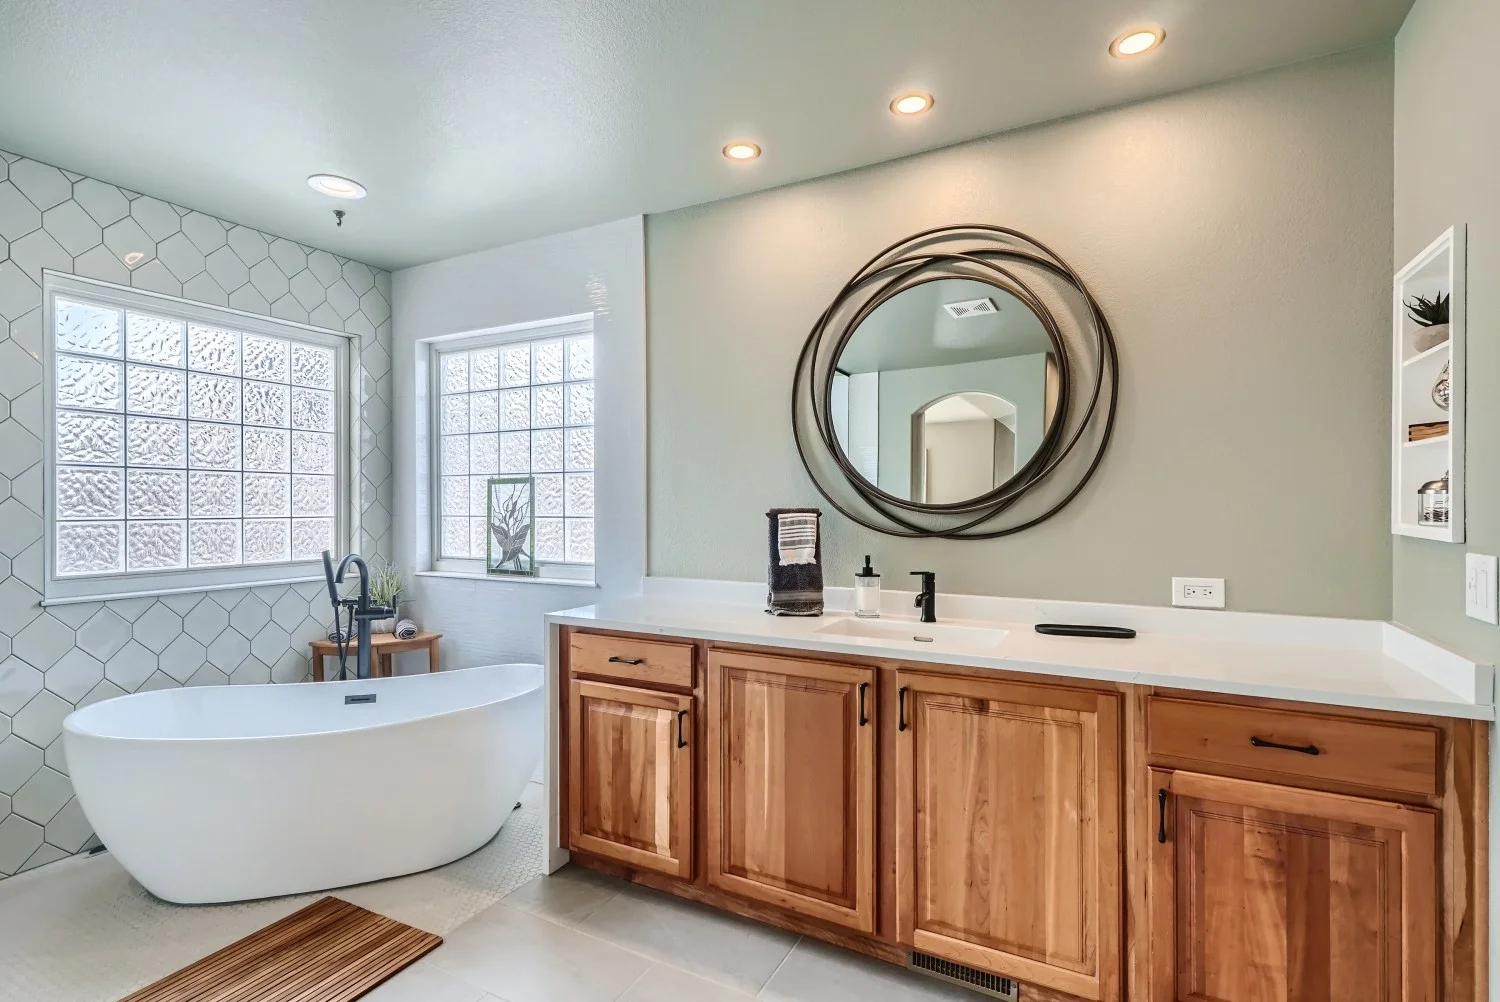 Is It Time to Remodel Your Bathroom?